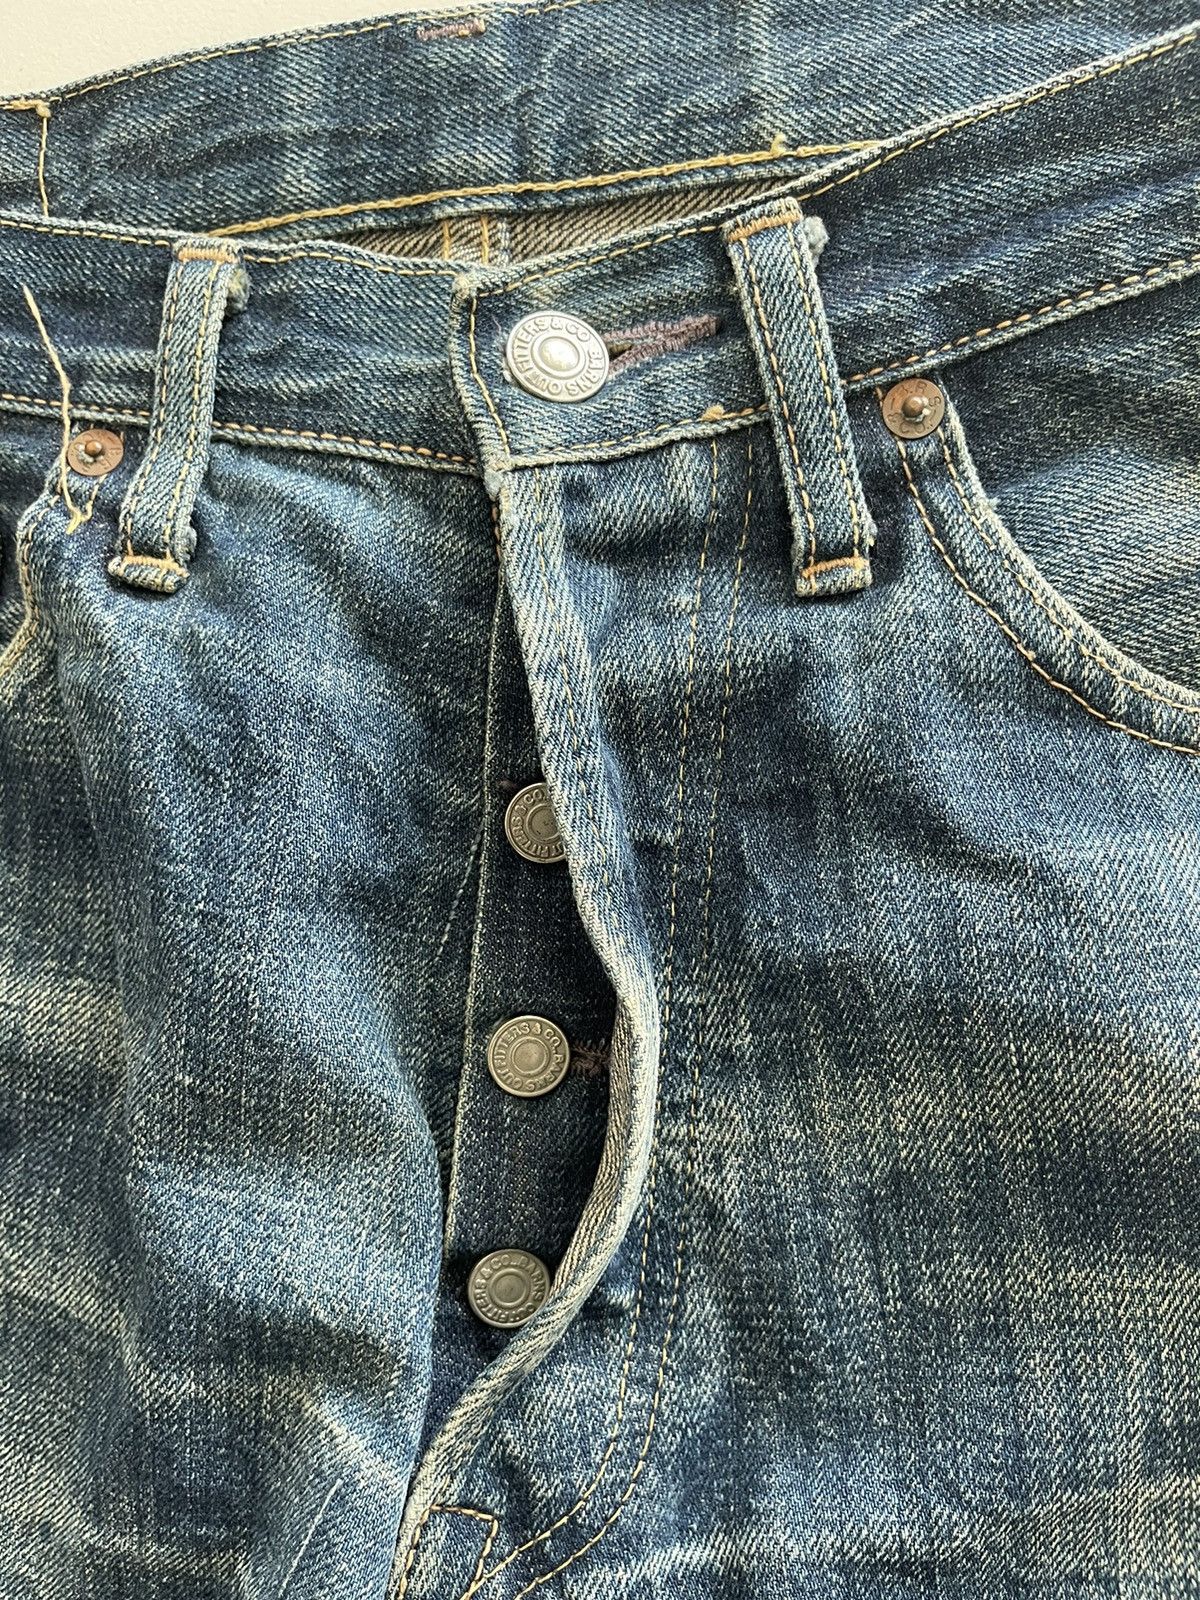 Japanese Brand - JAPANESE REPRO DENIM JEANS, BARNS OUTFITTERS & CO BRAND - 6